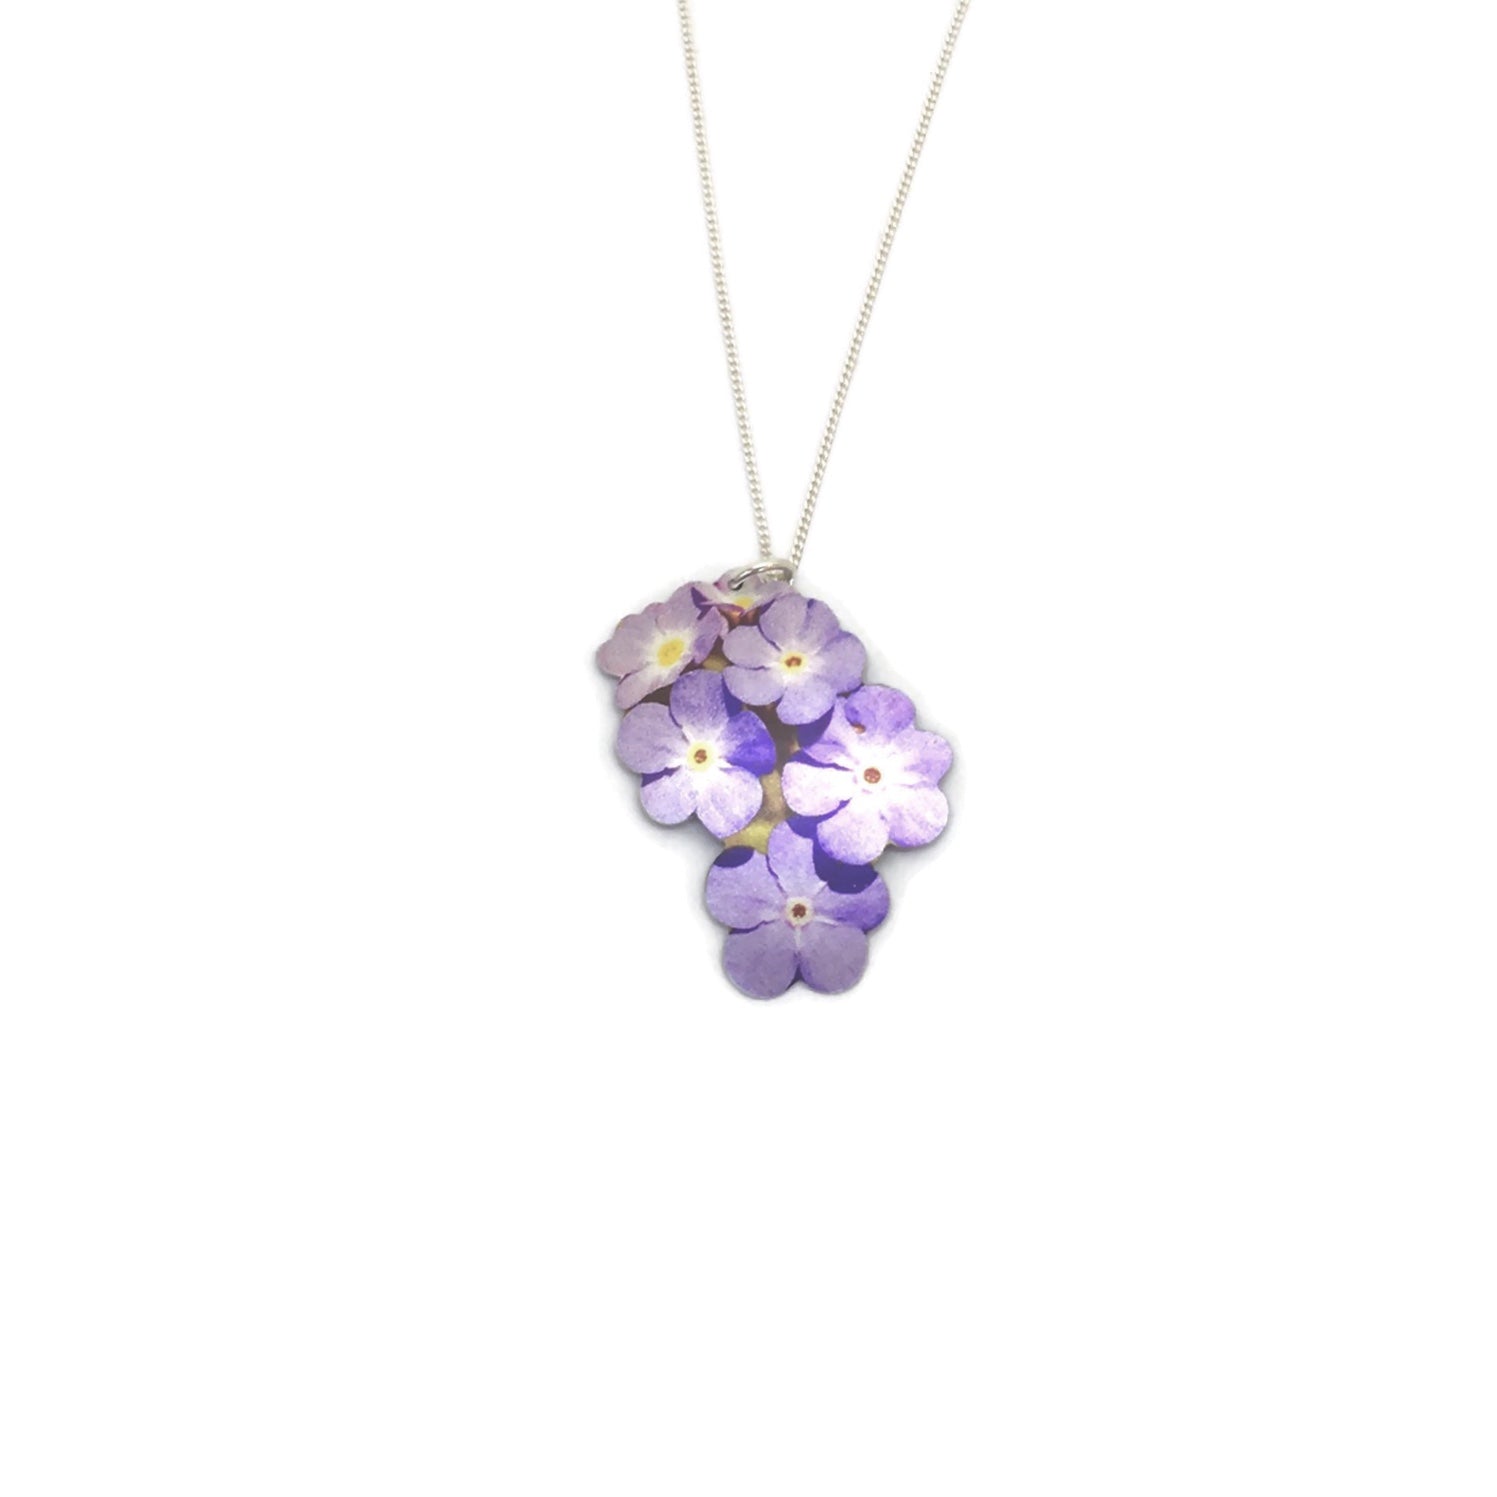 Forget me not flower necklace by Photofinish Jewellery